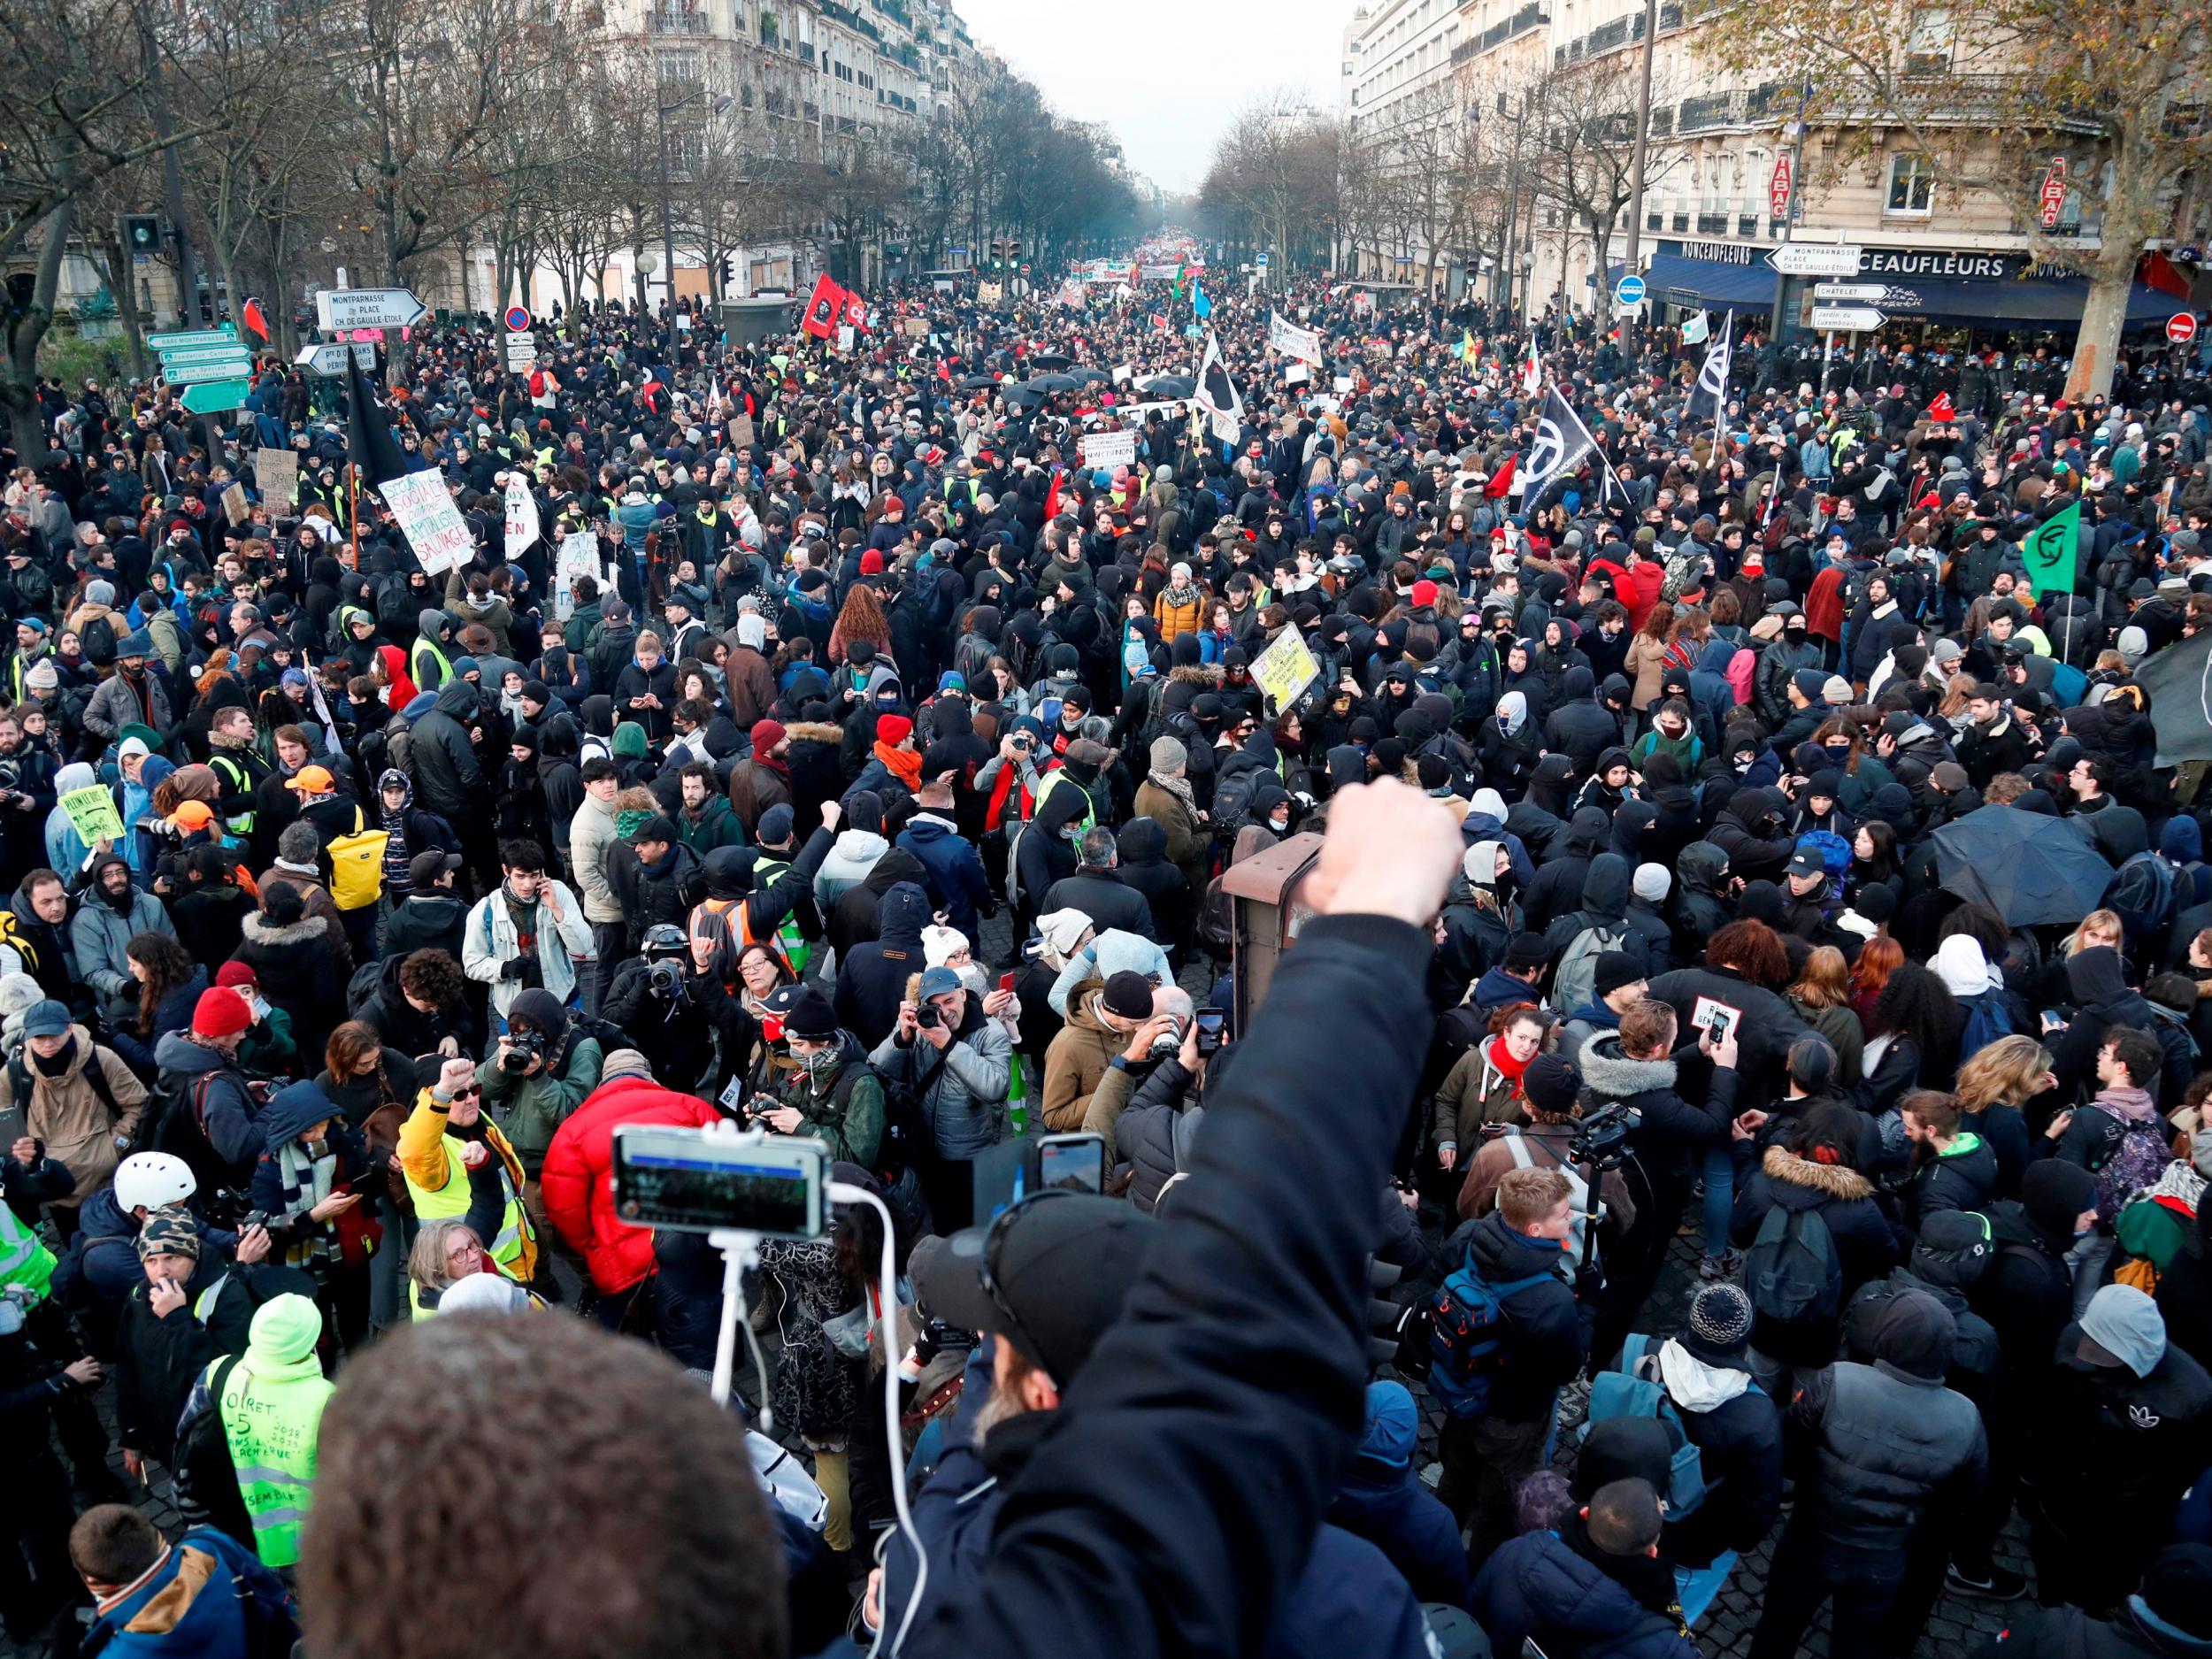 People take part in a demonstration in Paris on Tuesday, the sixth day of massive strike action over the government's proposed pension reforms